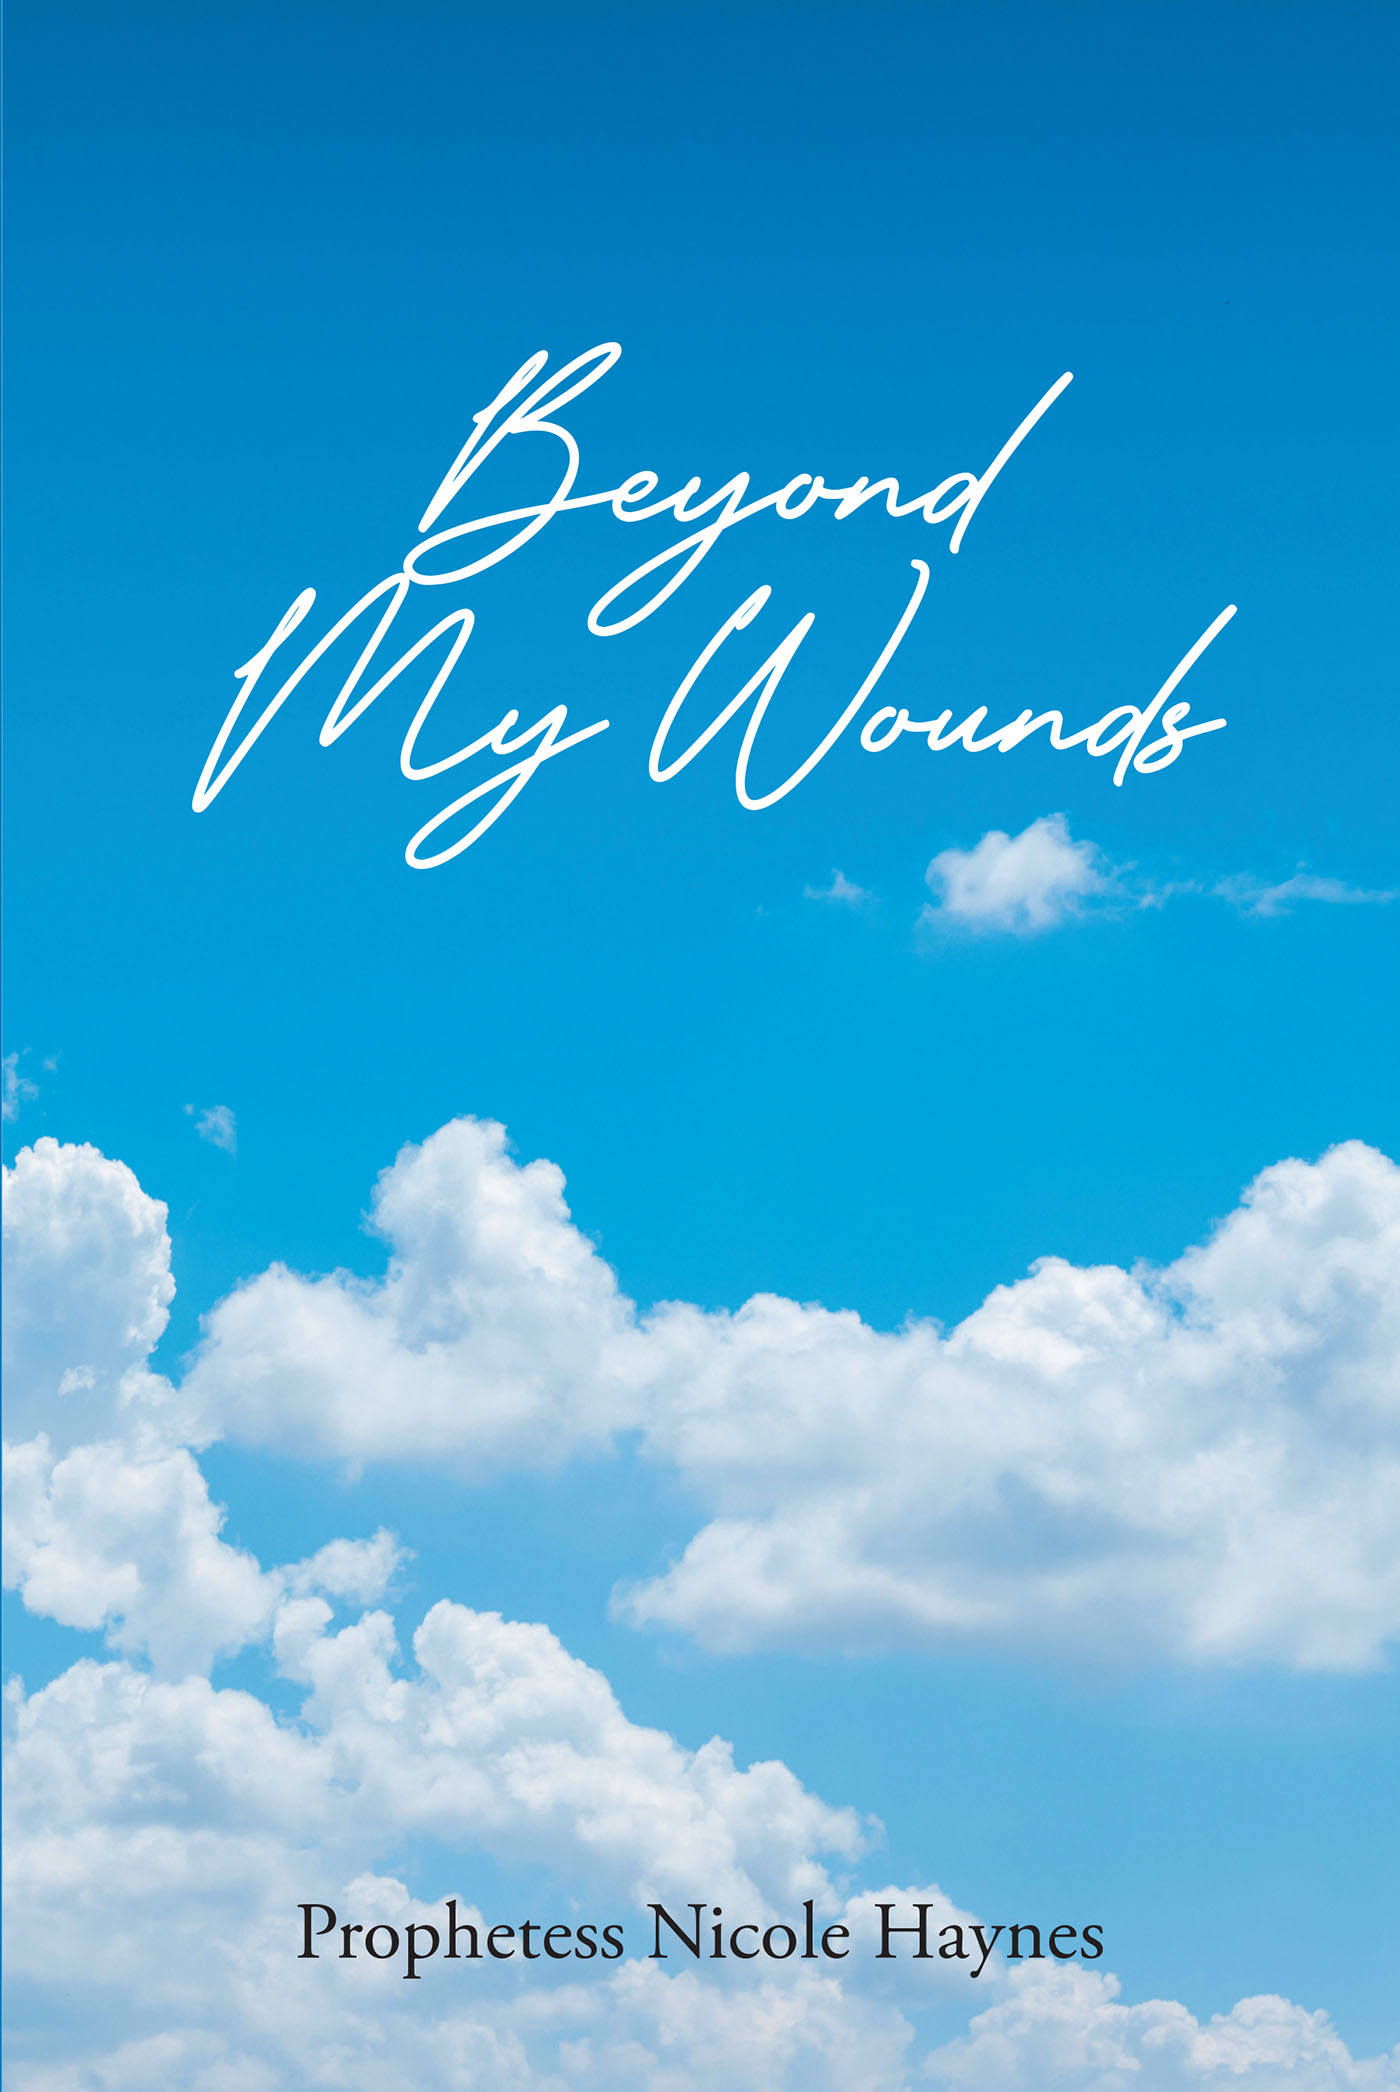 Prophetess Nicole Haynes’s Newly Released "Beyond My Wounds" is a Helpful Discussion of Ways to Work Through Past Hurts and Find Growth